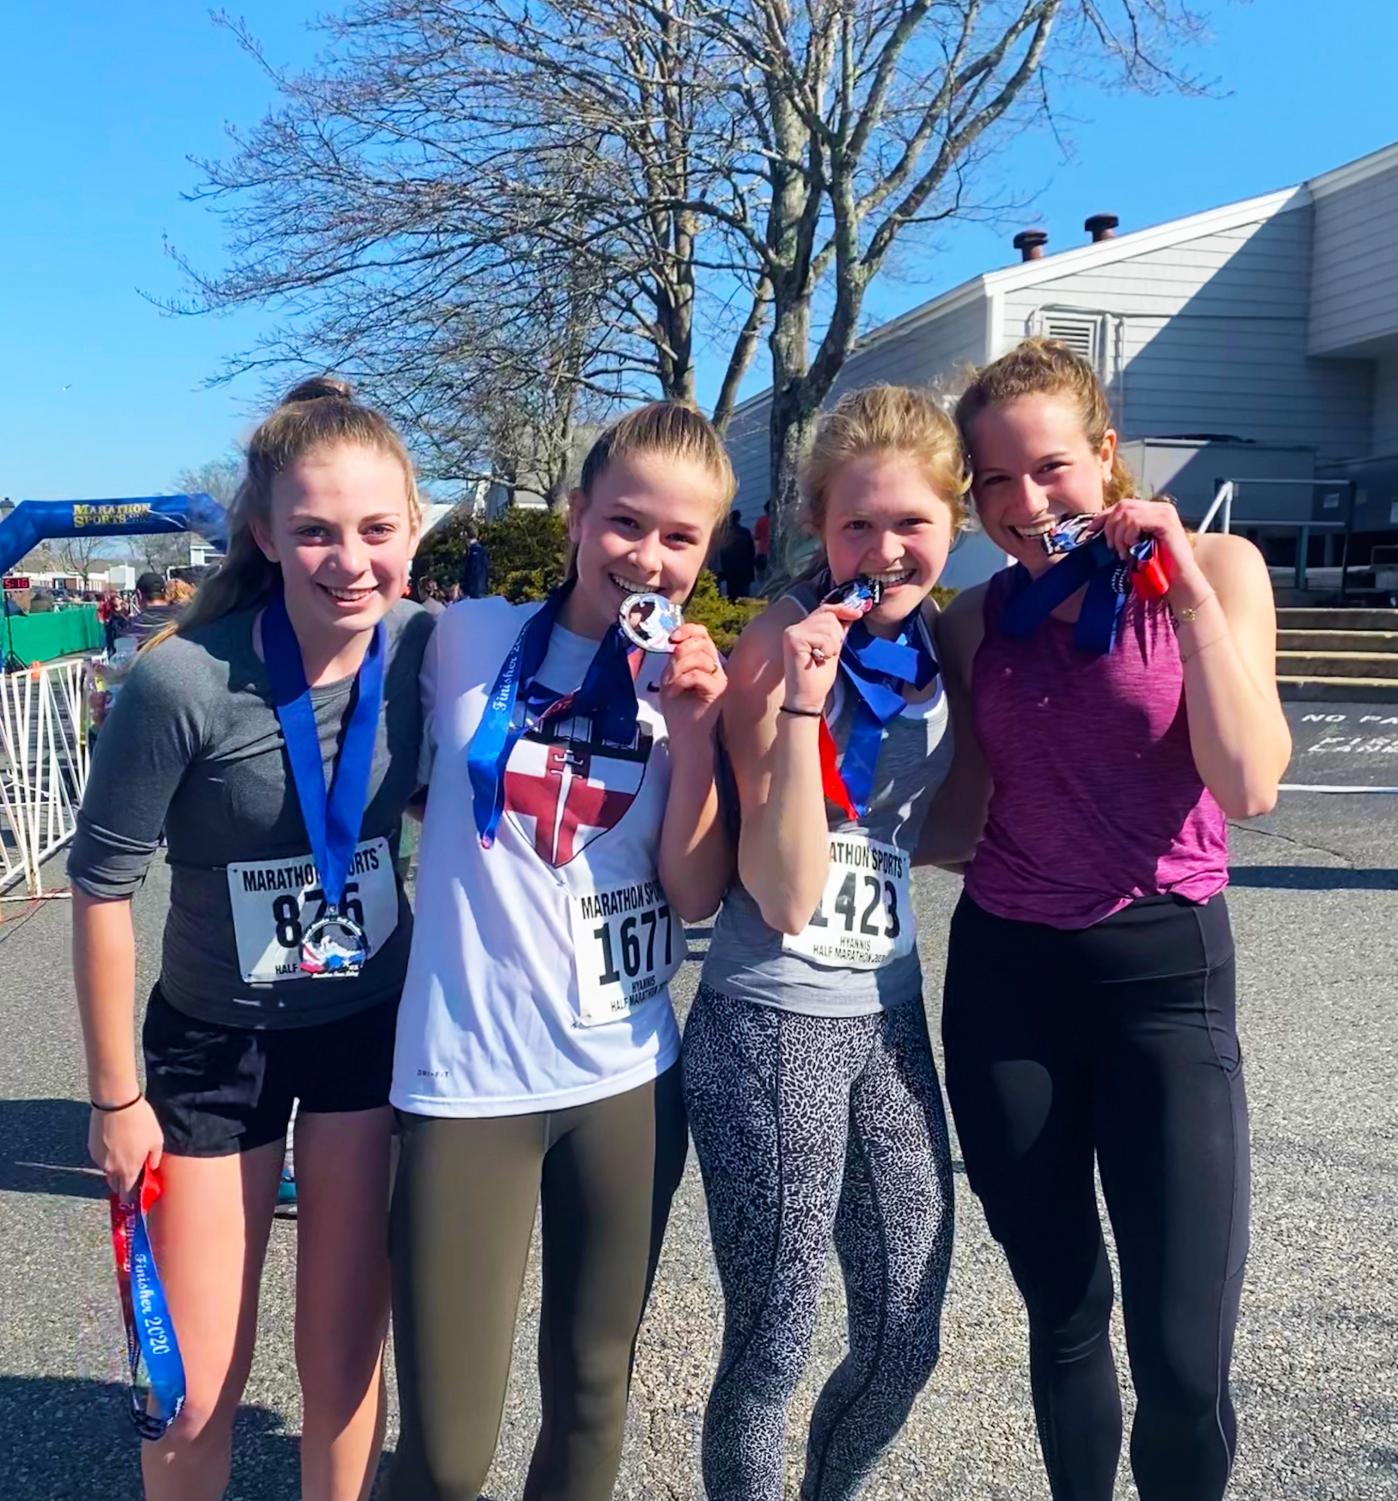 Finding the “Runner’s High” at the Hyannis HalfMarathon The Circle Voice